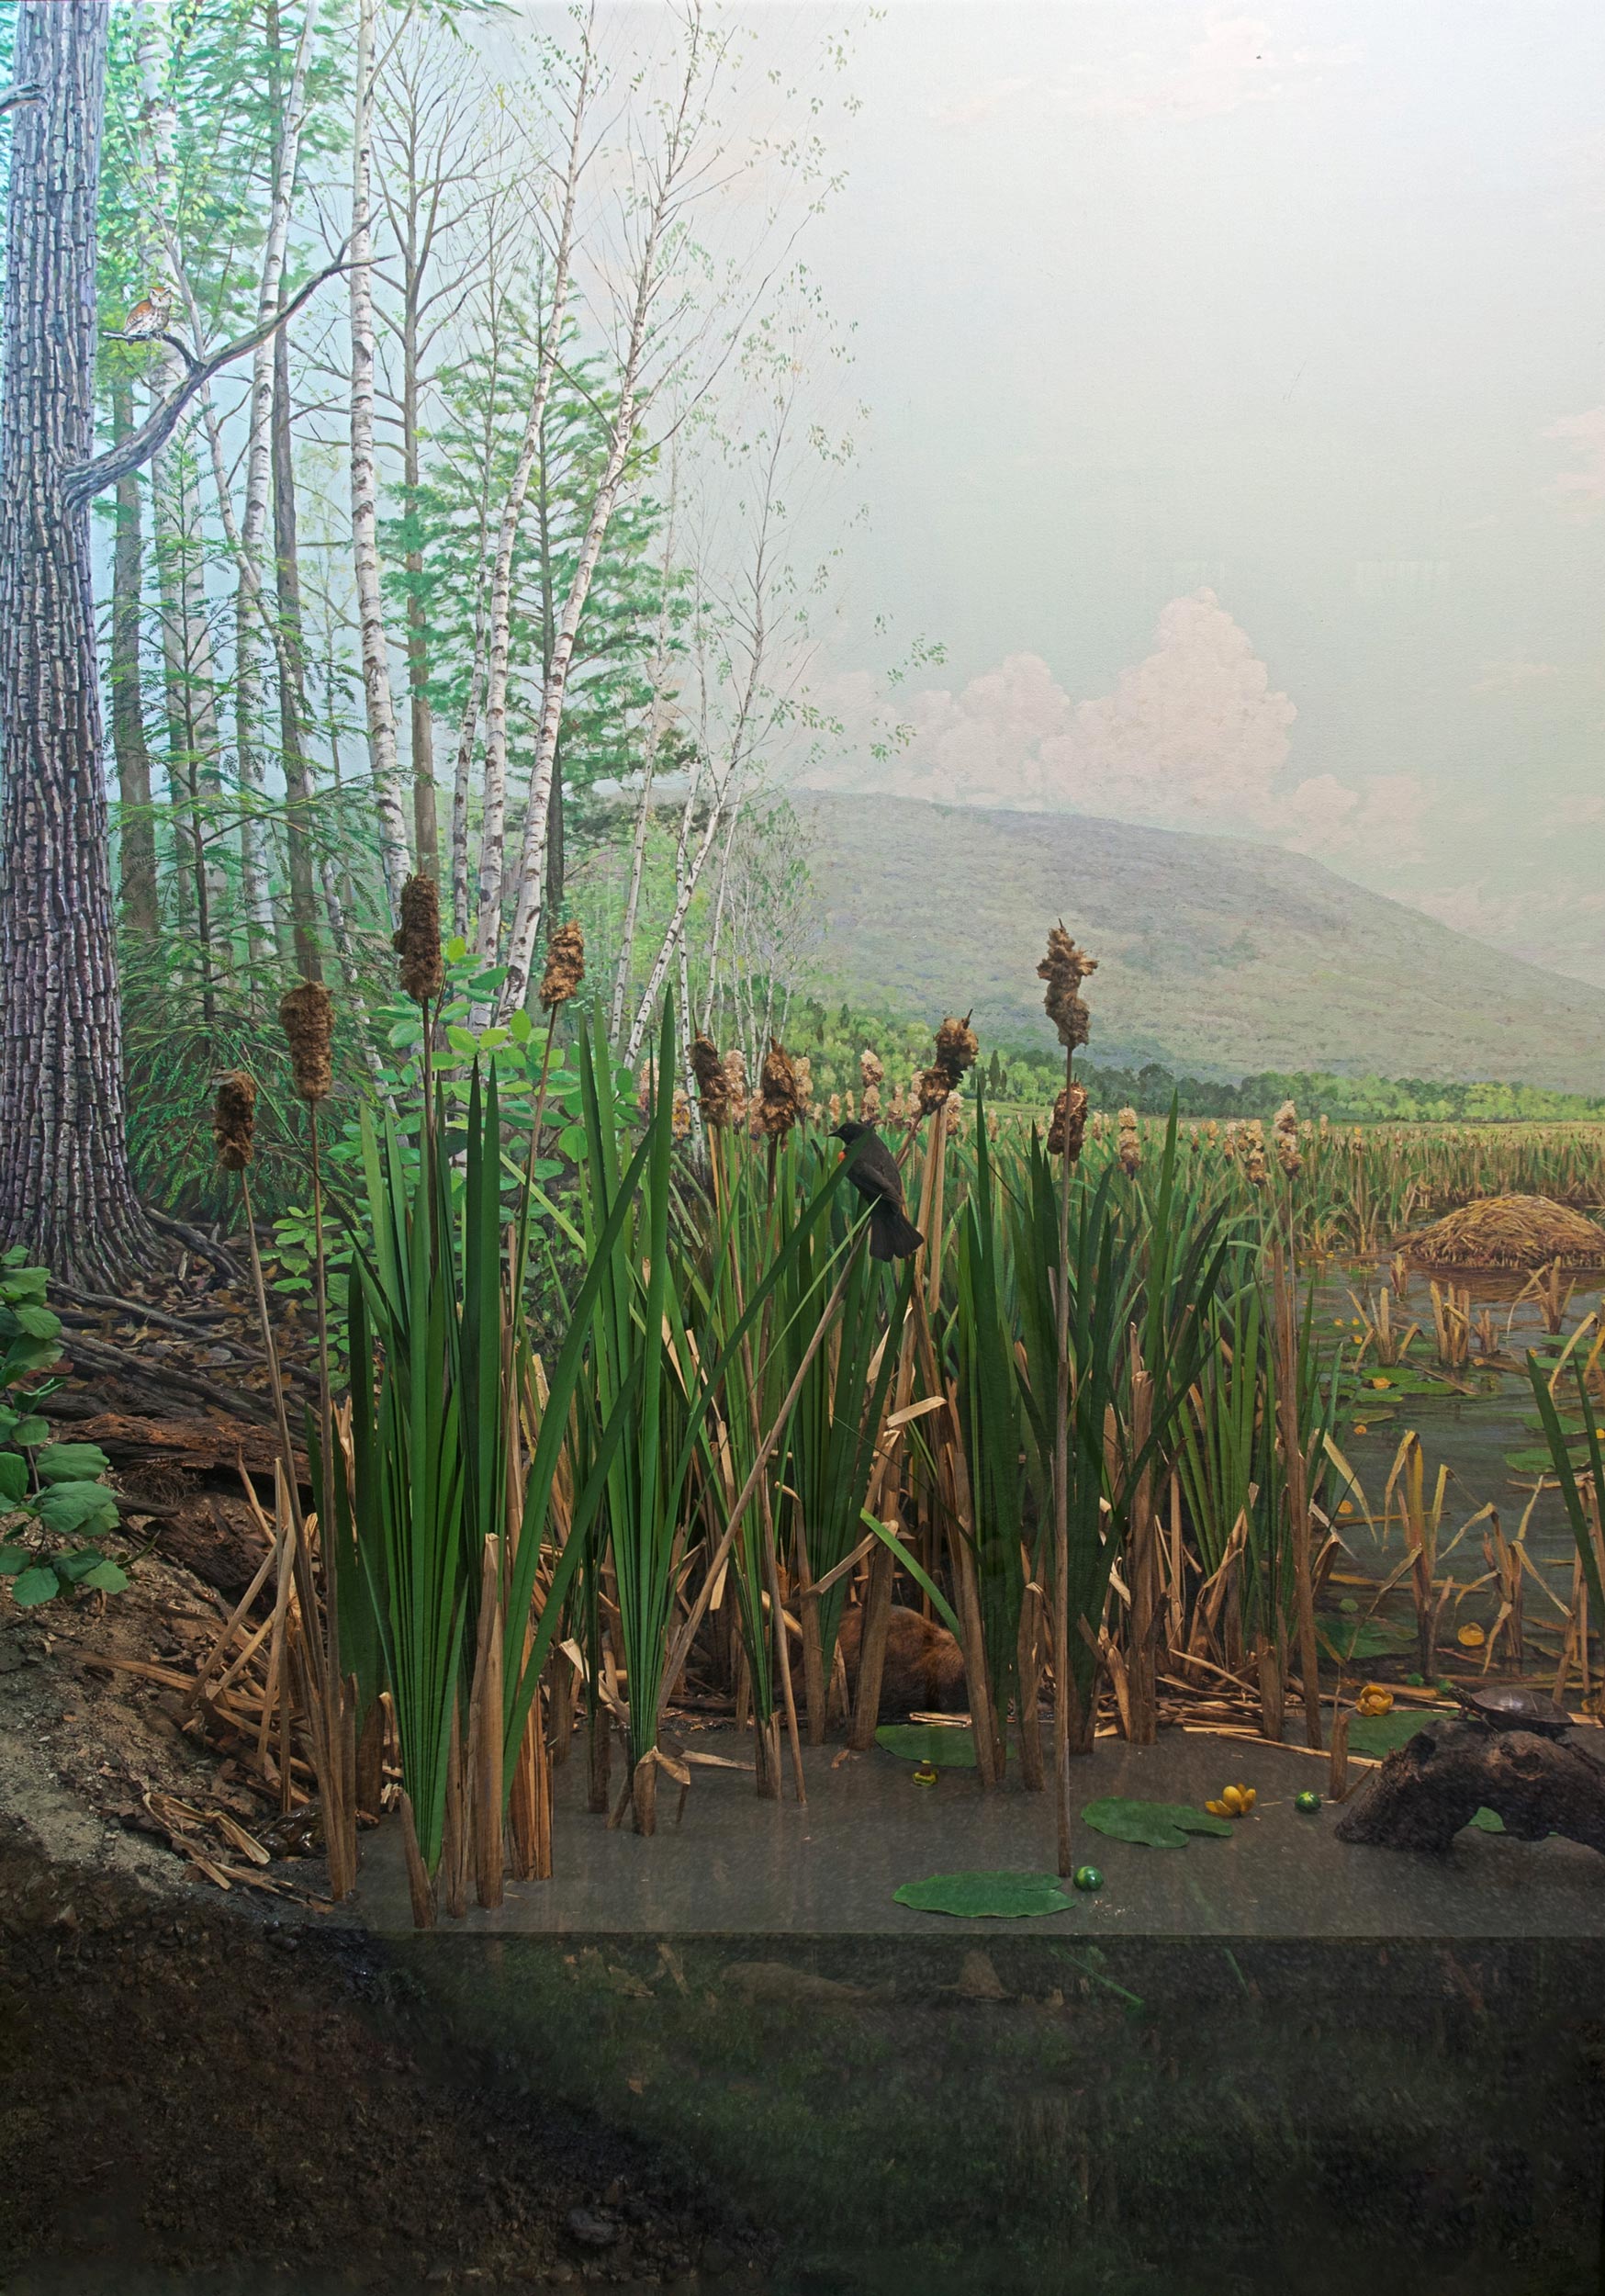 Section of a diorama showing a cross section of a lake